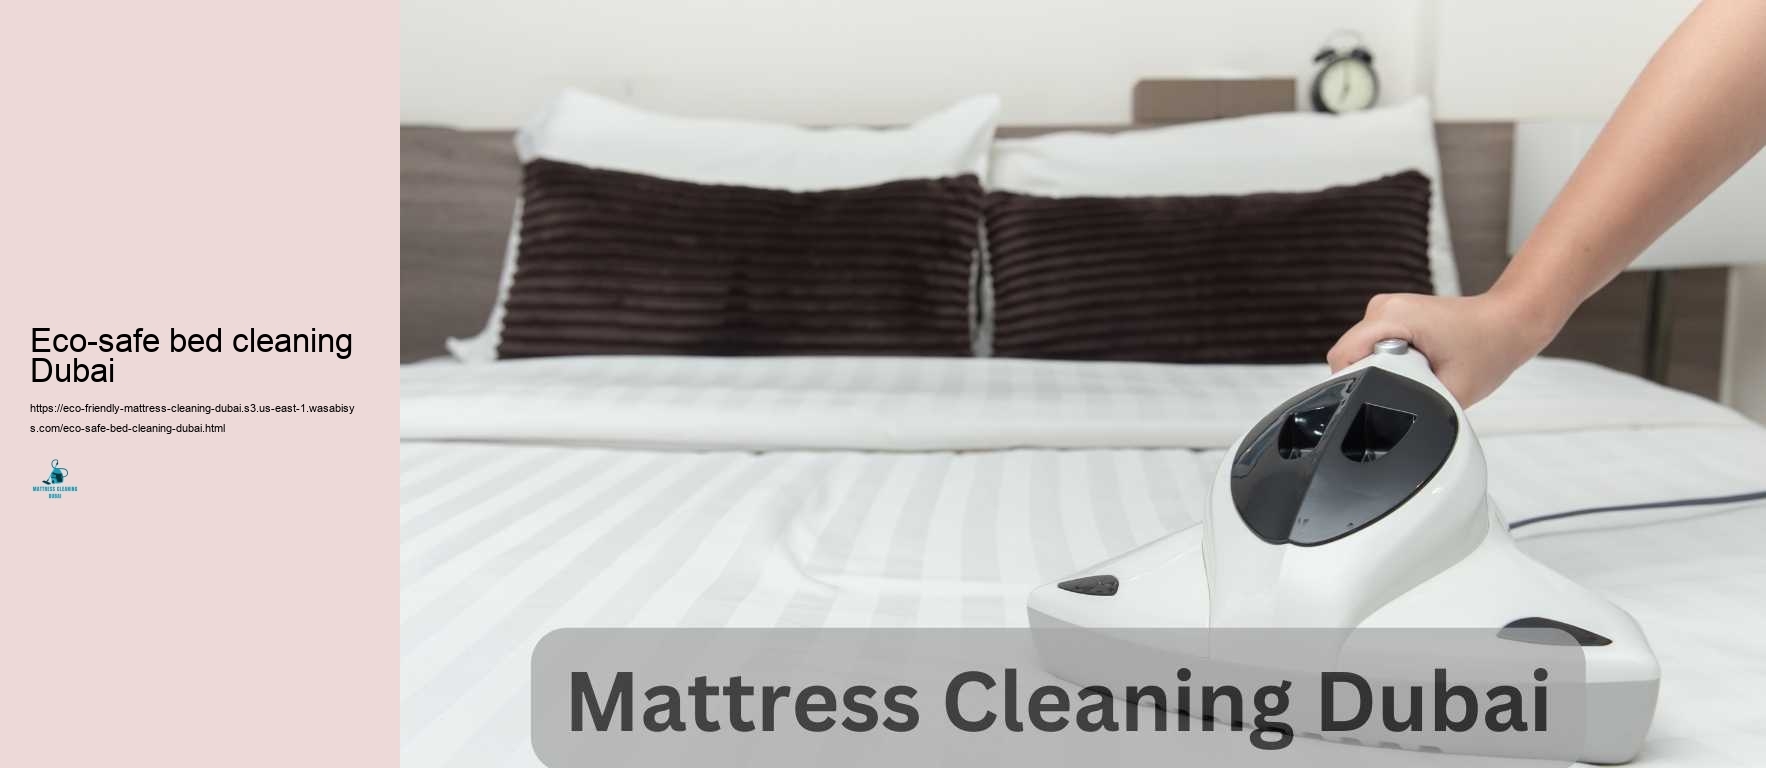 Eco-safe bed cleaning Dubai